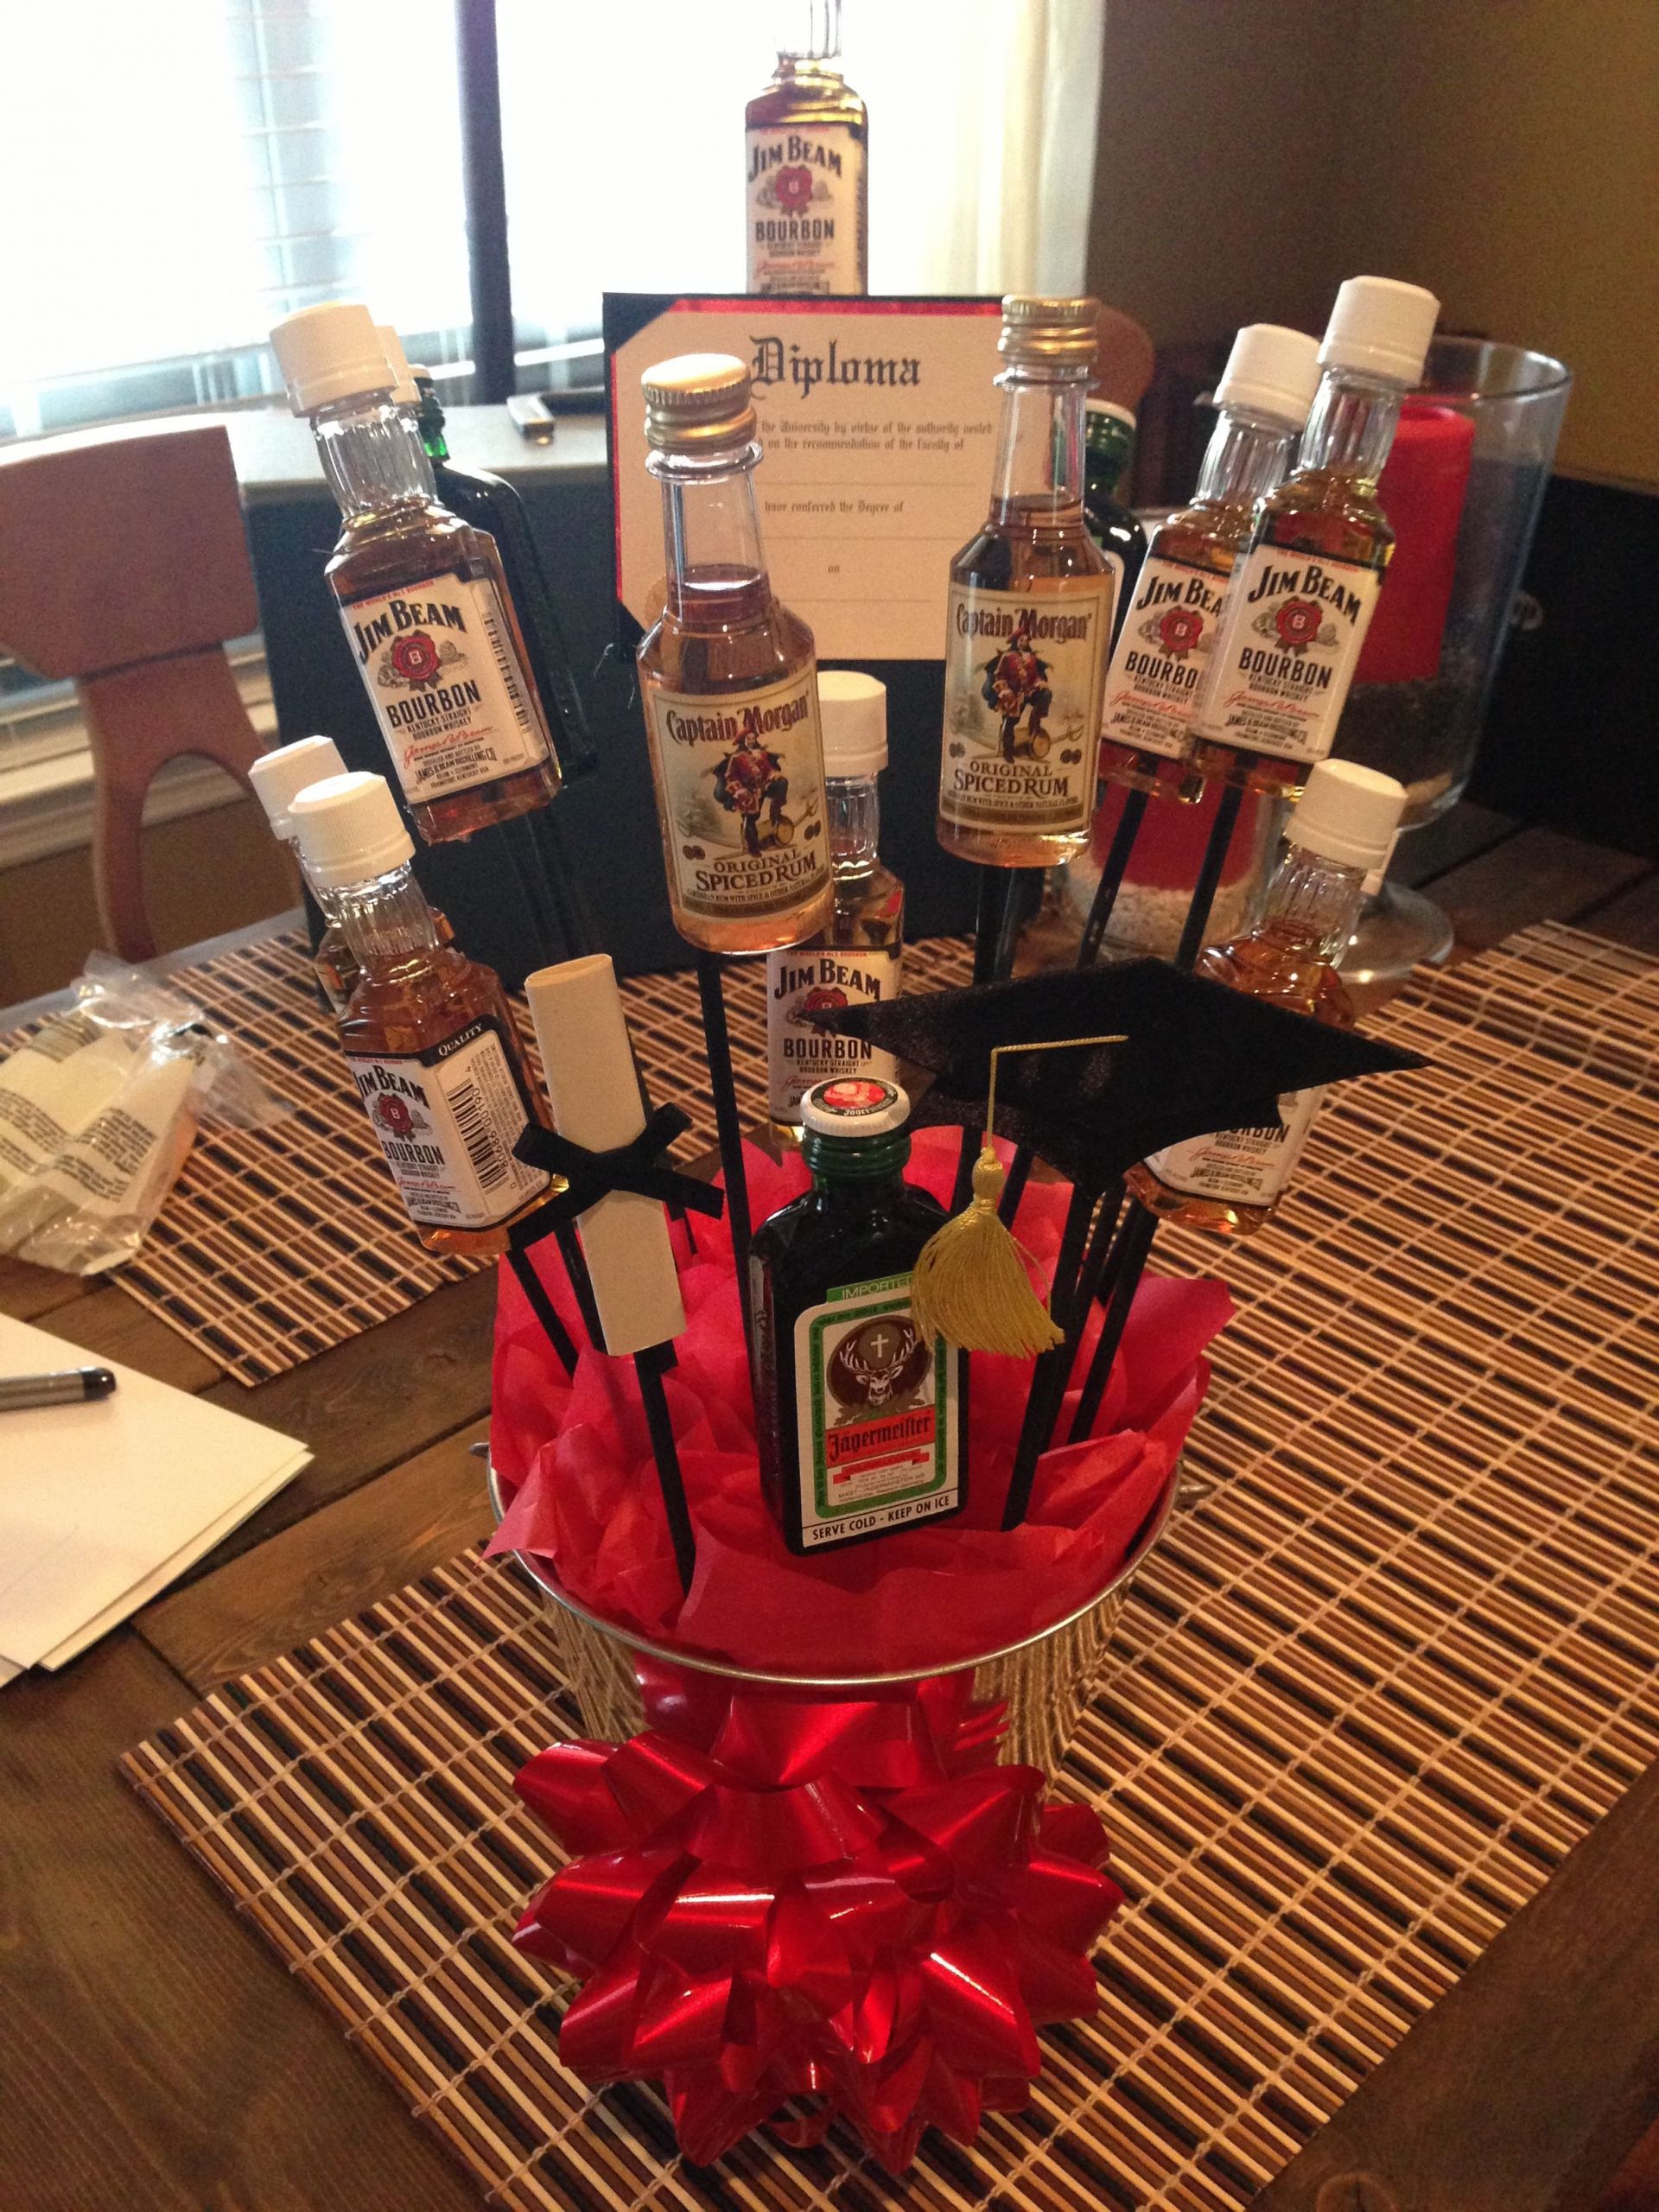 College Graduation Gift Ideas For Men
 Alcohol bouquet for a guy graduating college